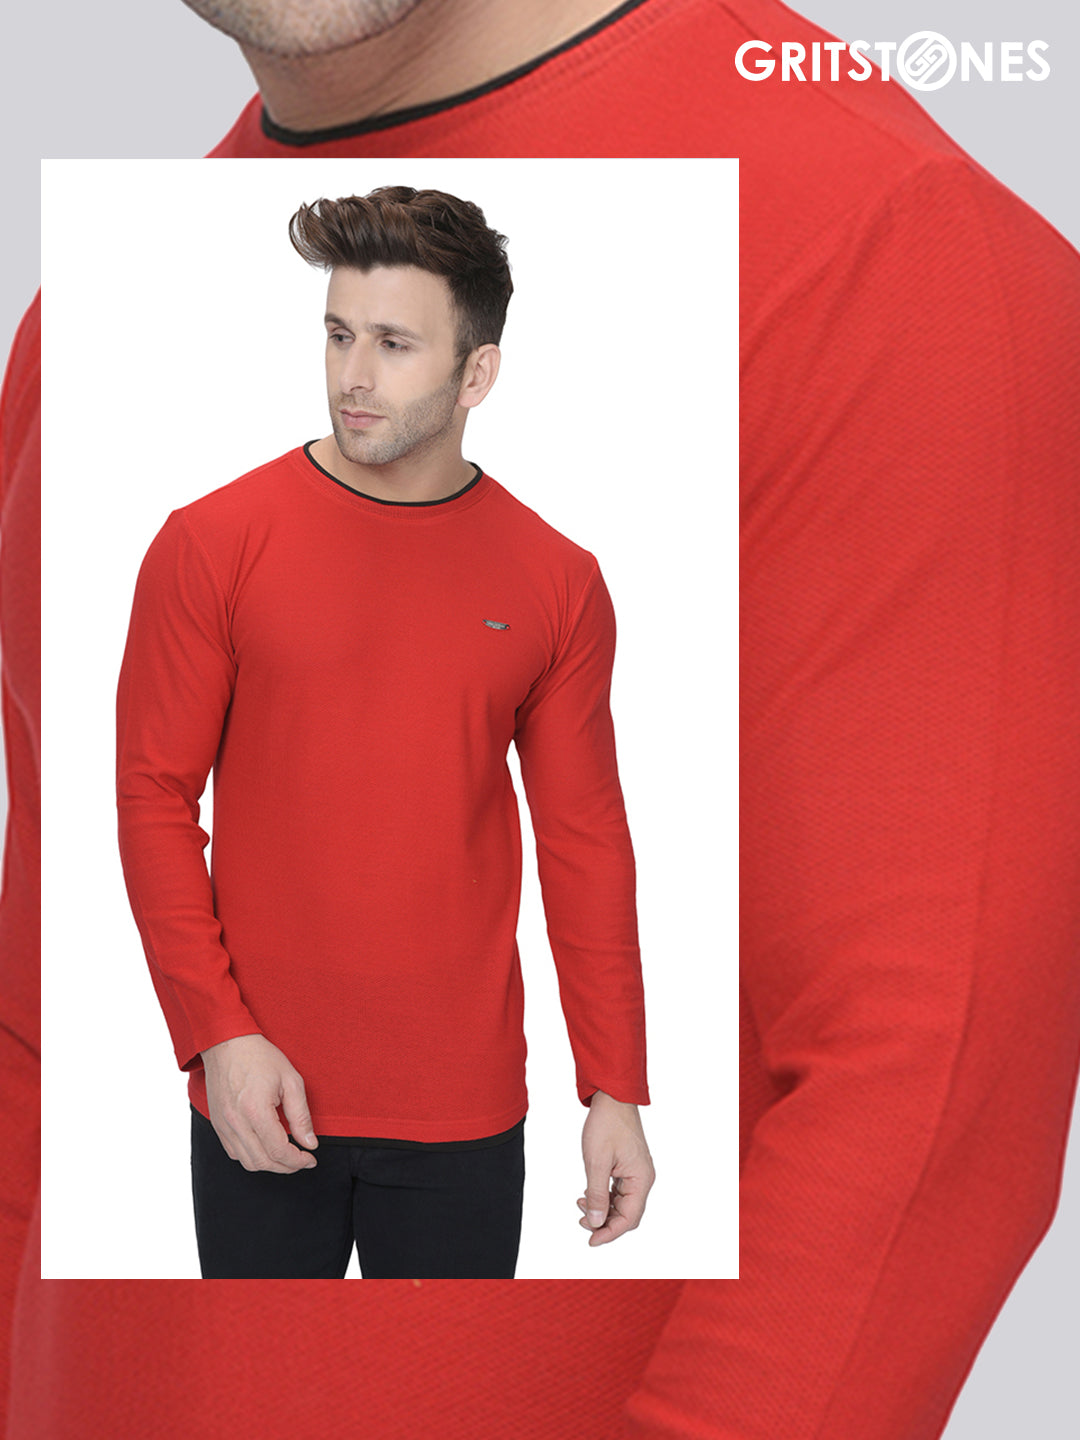 Red Full Sleeves Waffle Knit Crew Neck with Black Contrast Piping T-Shirt